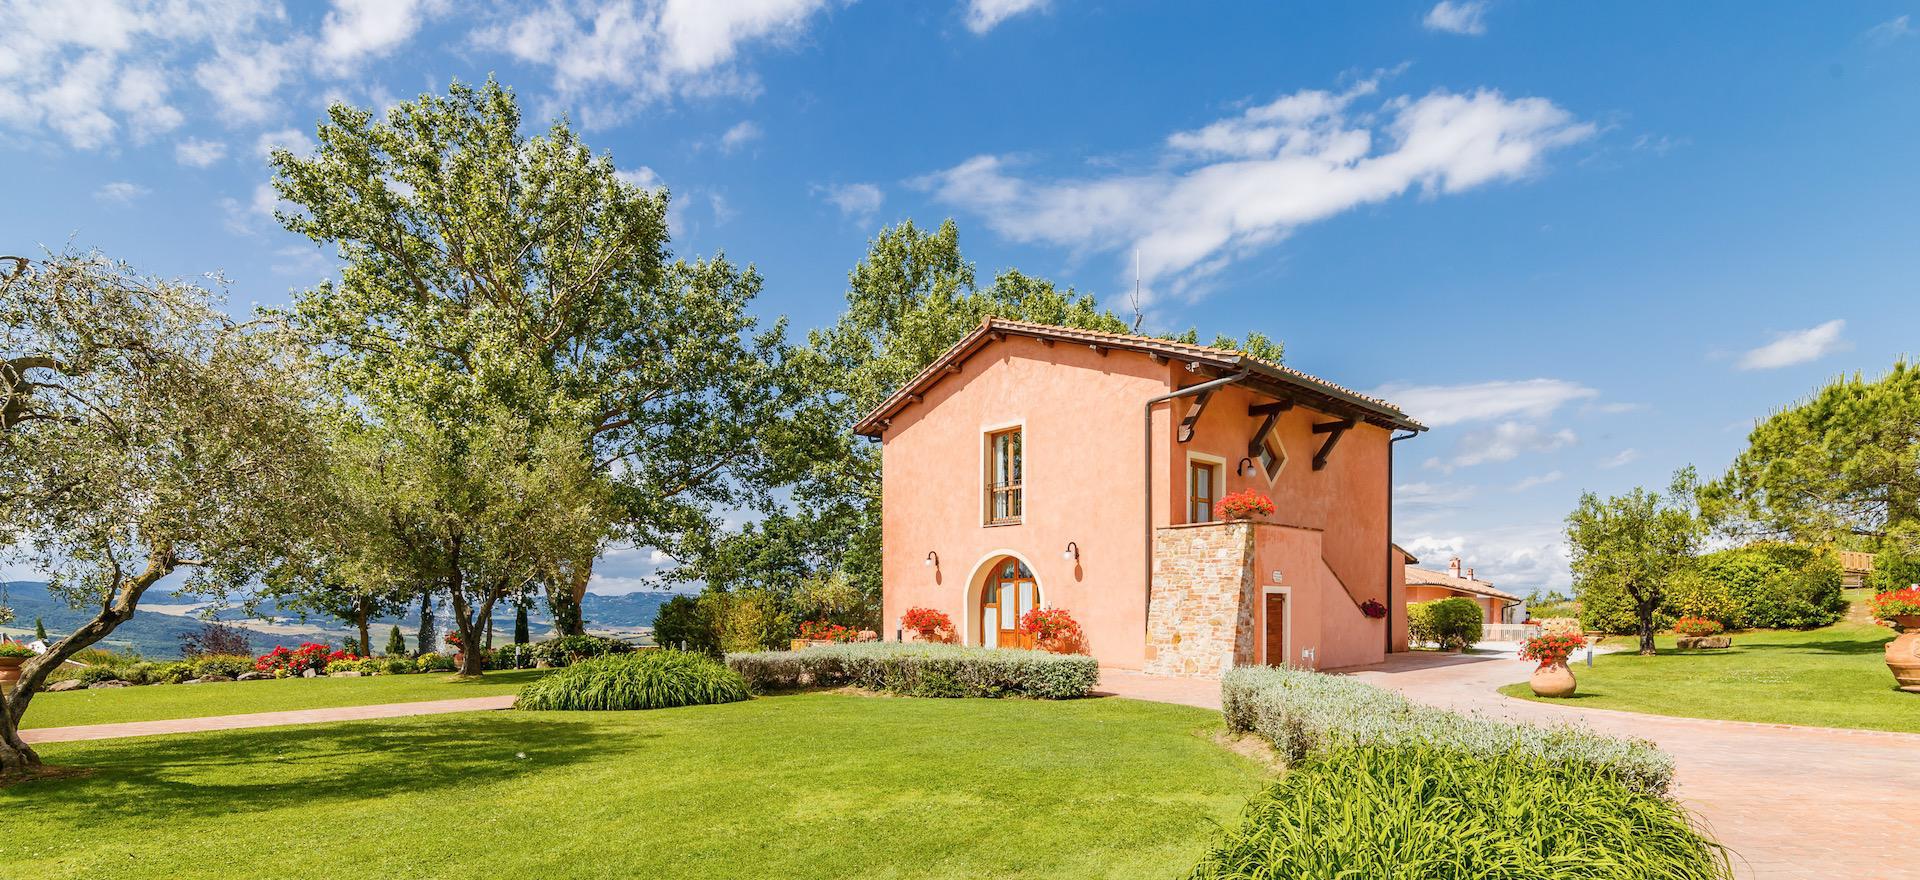 Agriturismo Tuscany Large agriturismo in Tuscany with stunning views